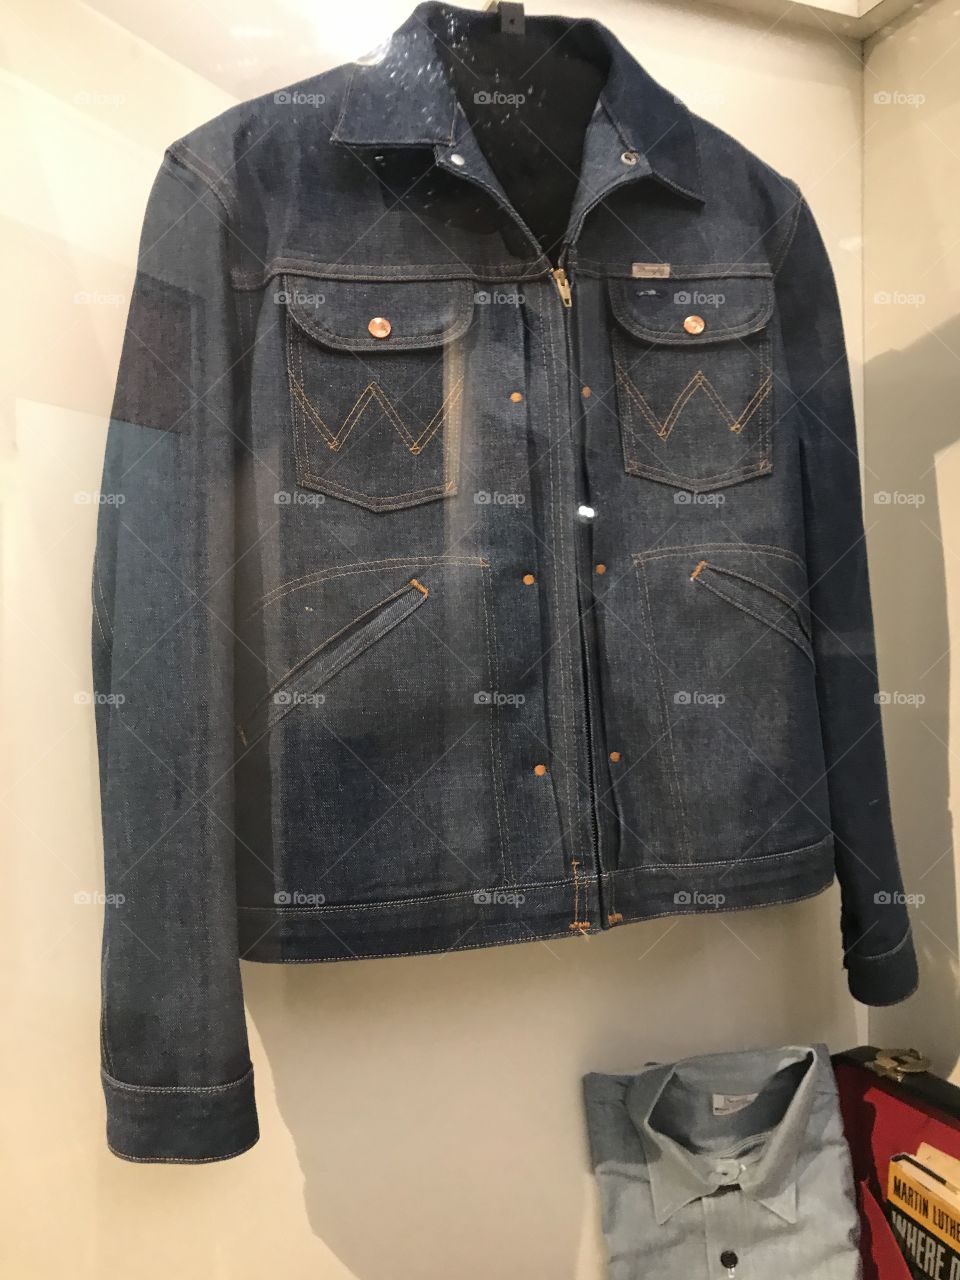 Martin Luther King Jr.’s jean jacket 